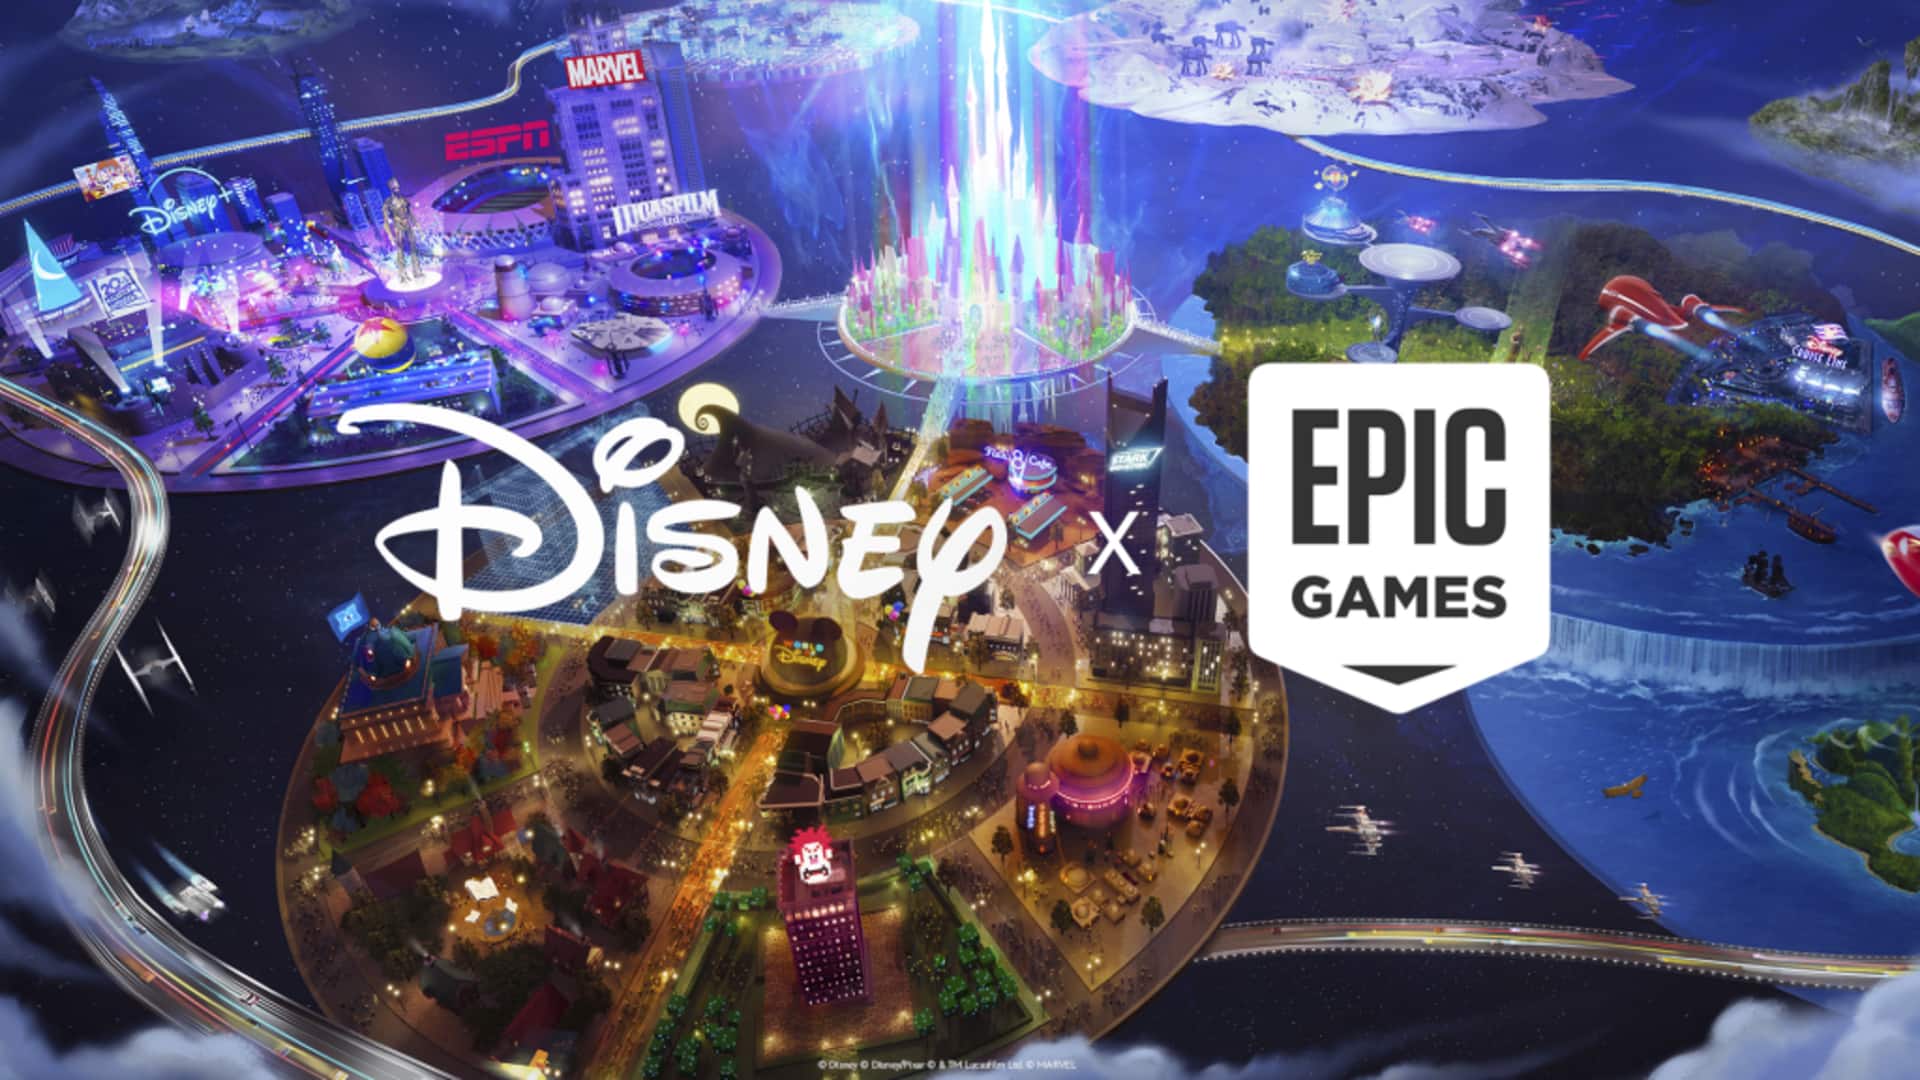 Disney invests $1.5bn in Epic Games for a 'persistent universe'